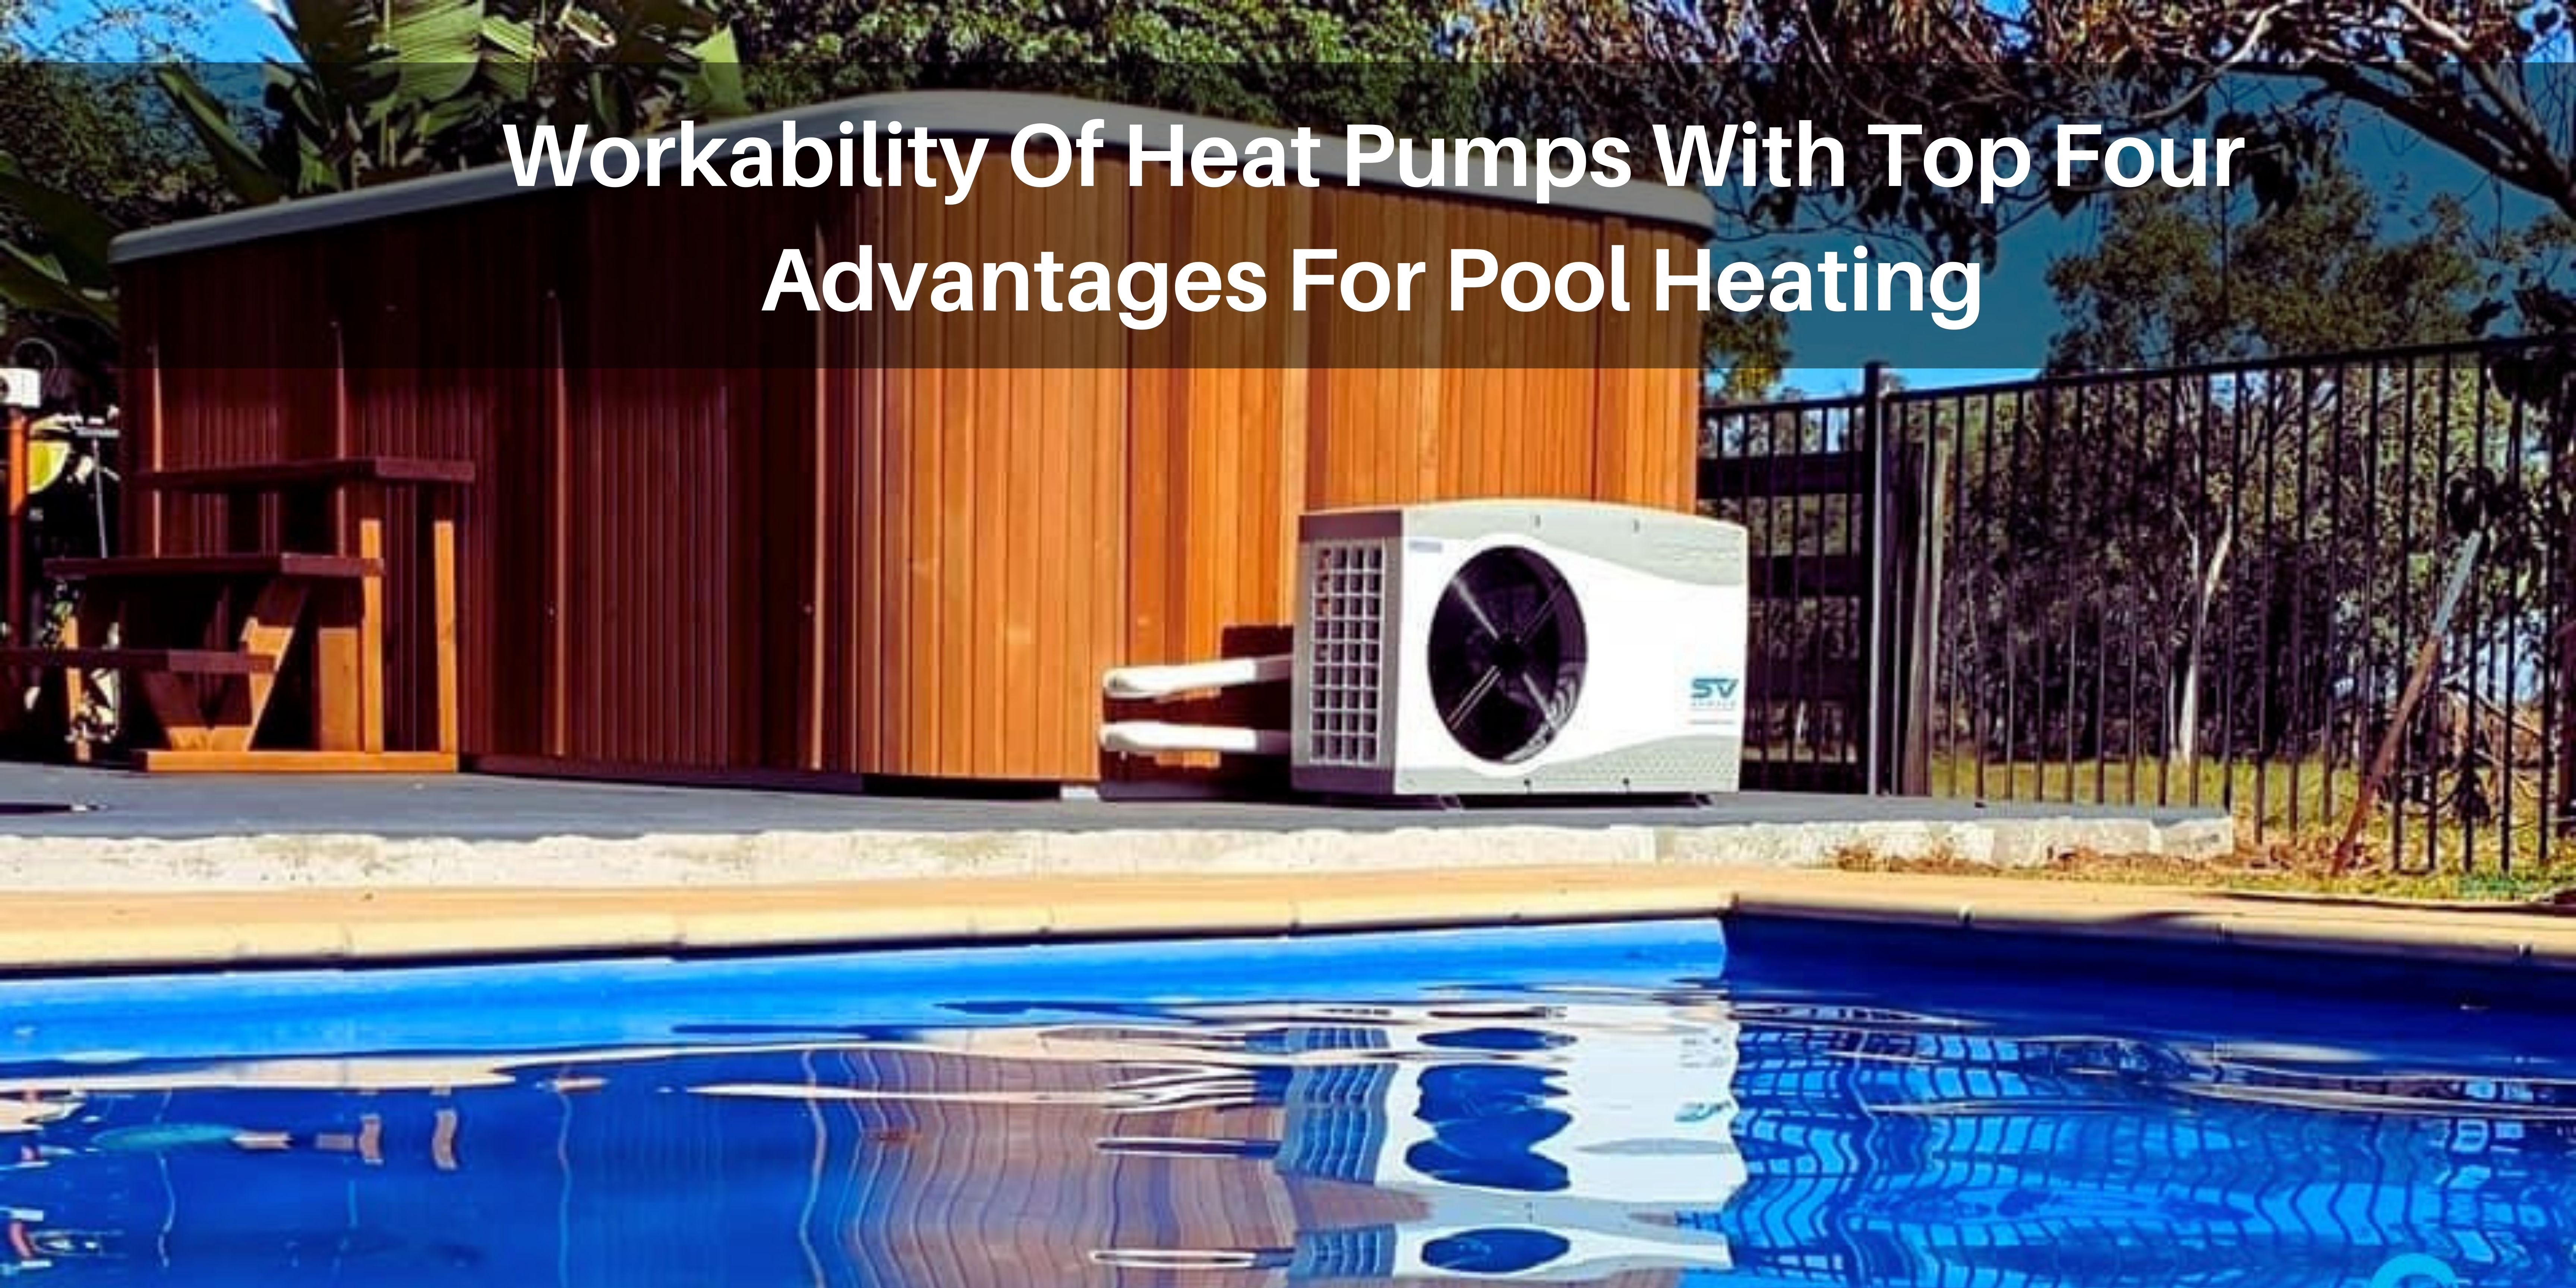 Workability Of Heat Pumps With Top Four Advantages For Pool Heating